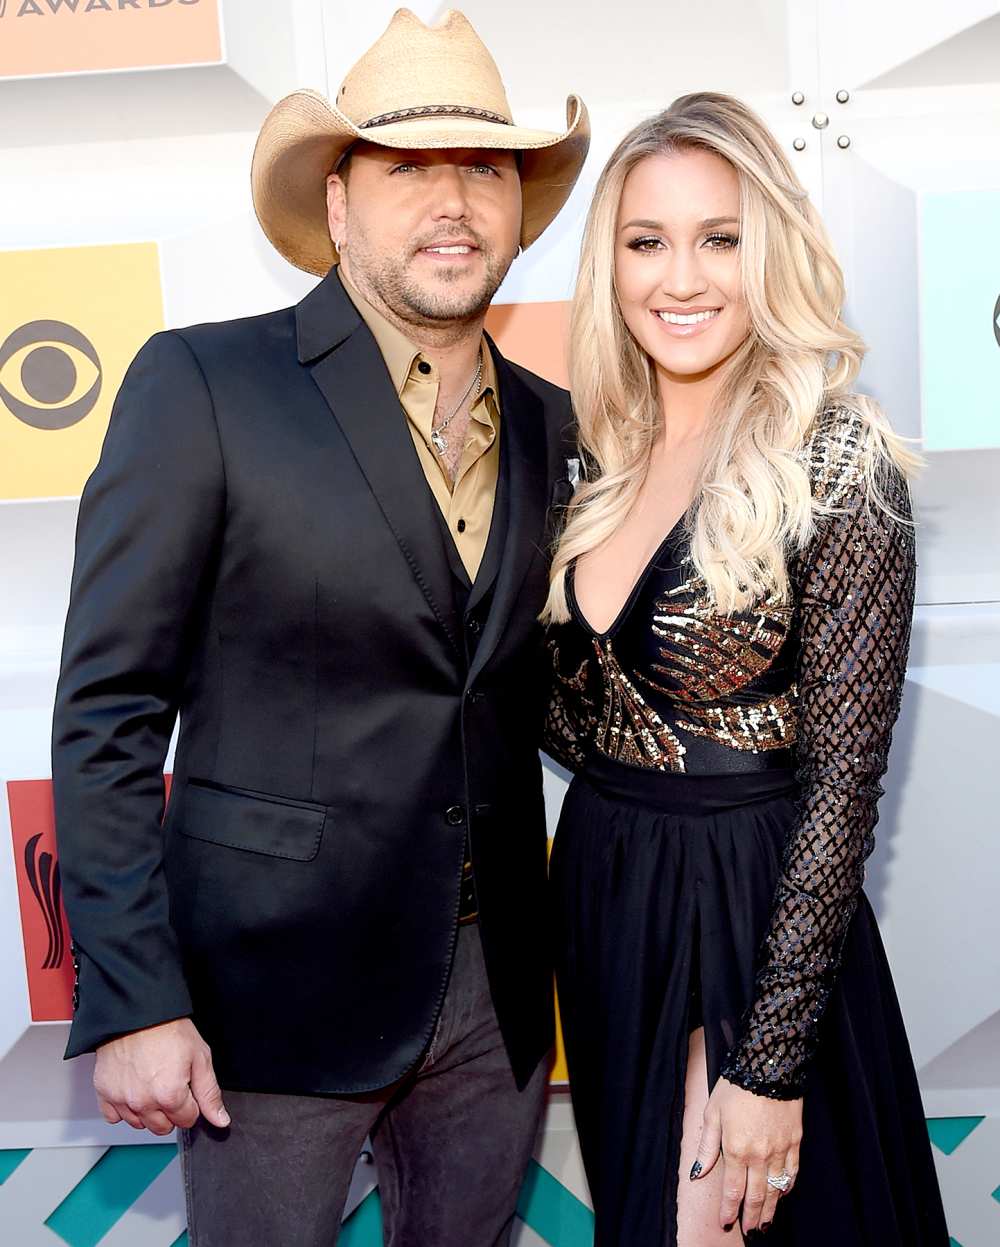 Jason Aldean and Brittany Kerr attend the 51st Academy of Country Music Awards.